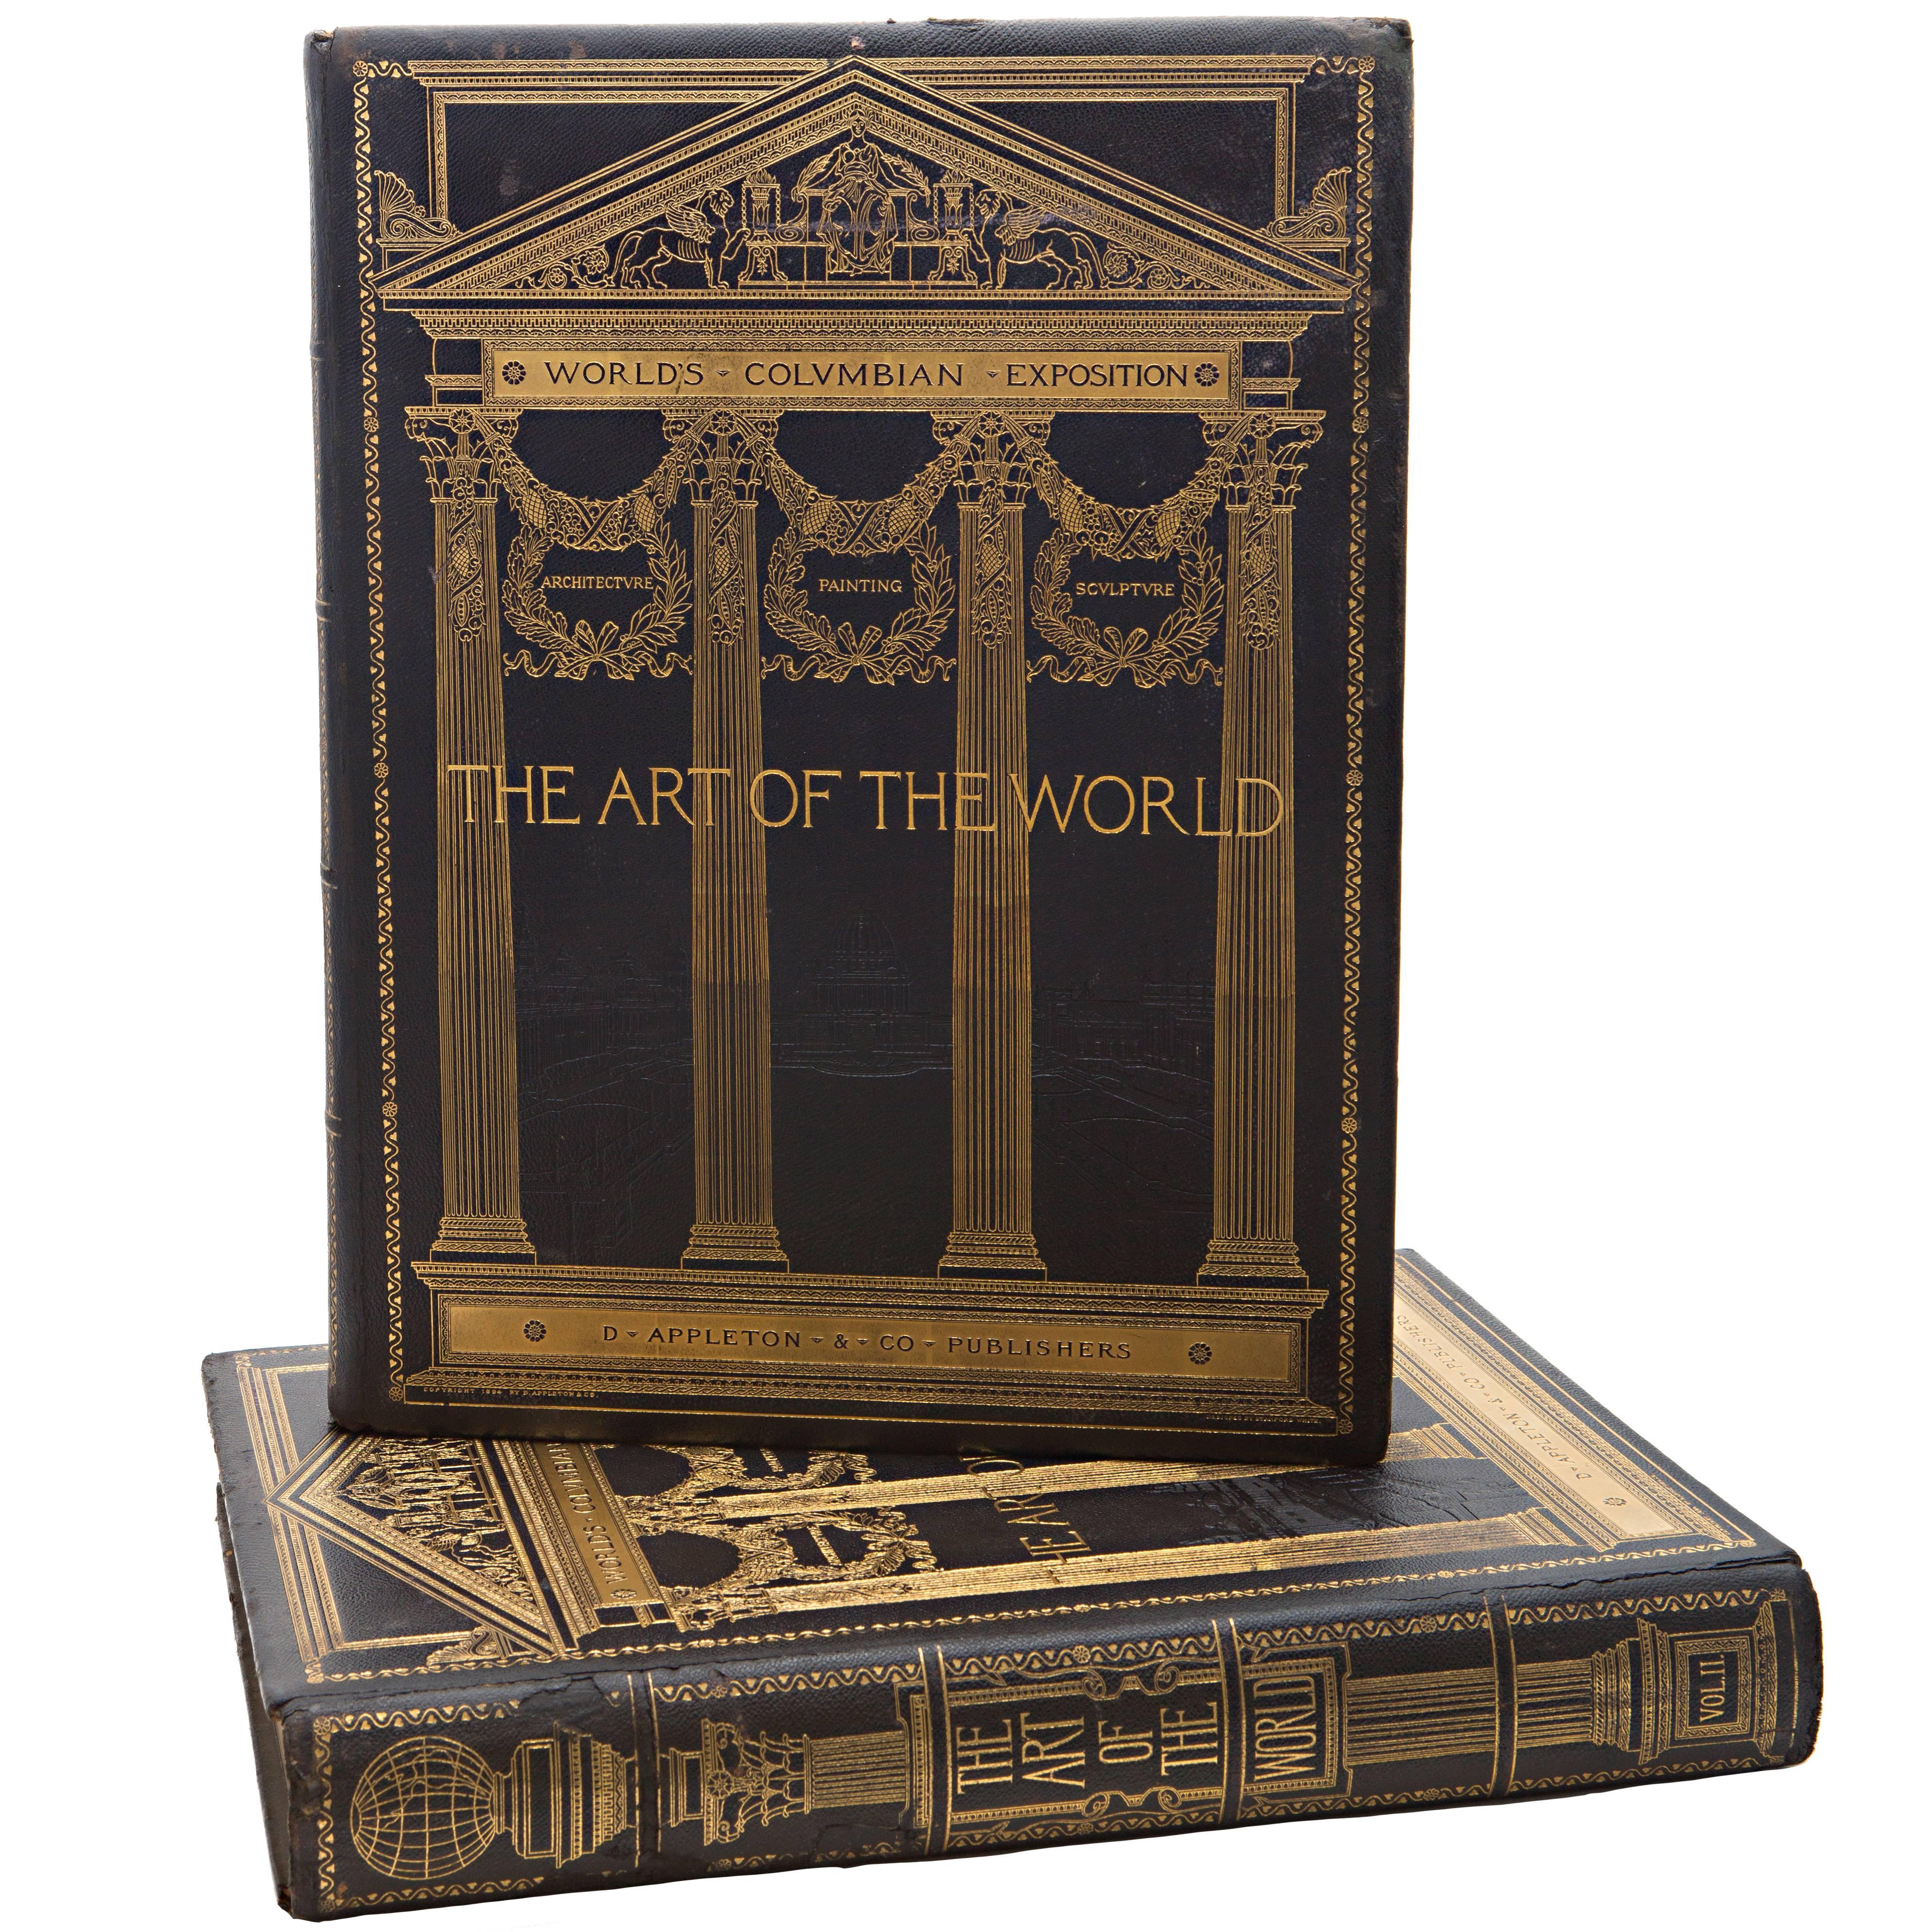 19th Century Art of the World Columbian Exposition Books, Two Volumes For Sale